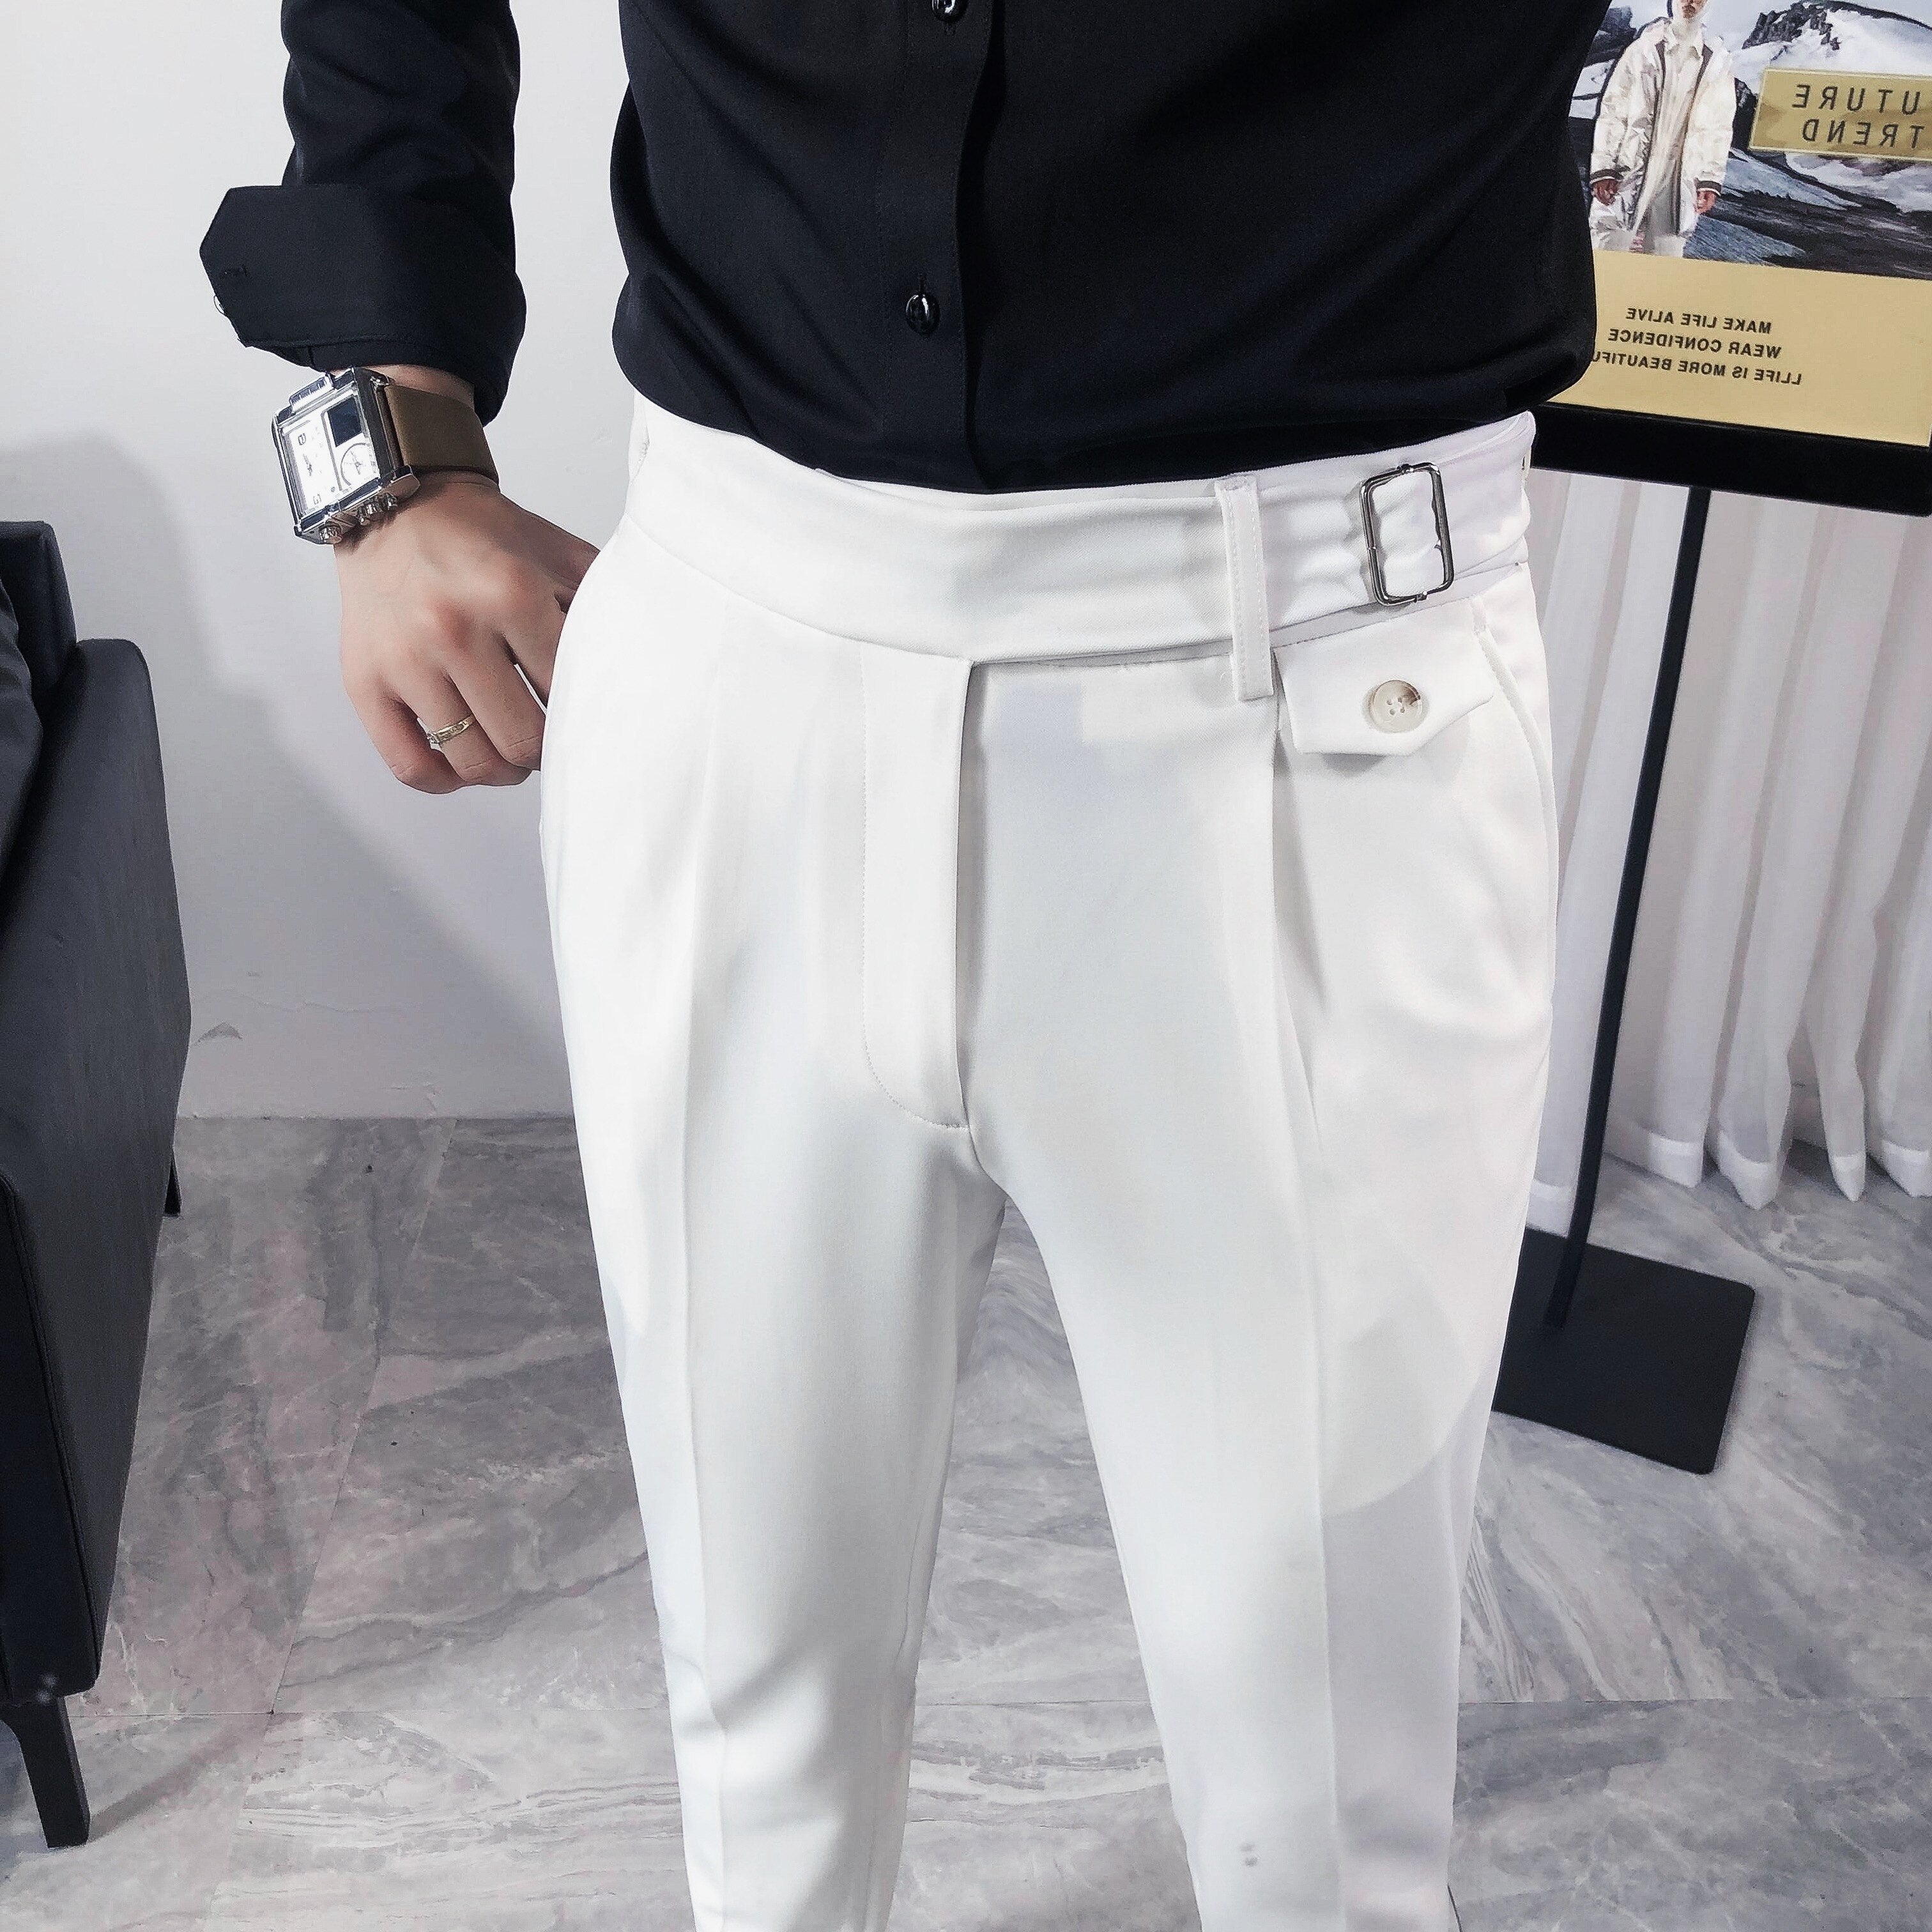 Korean Style Cotton Business Mens Formal Pants Style For Men Slim Fit,  Formal & Casual From Cong02, $31.91